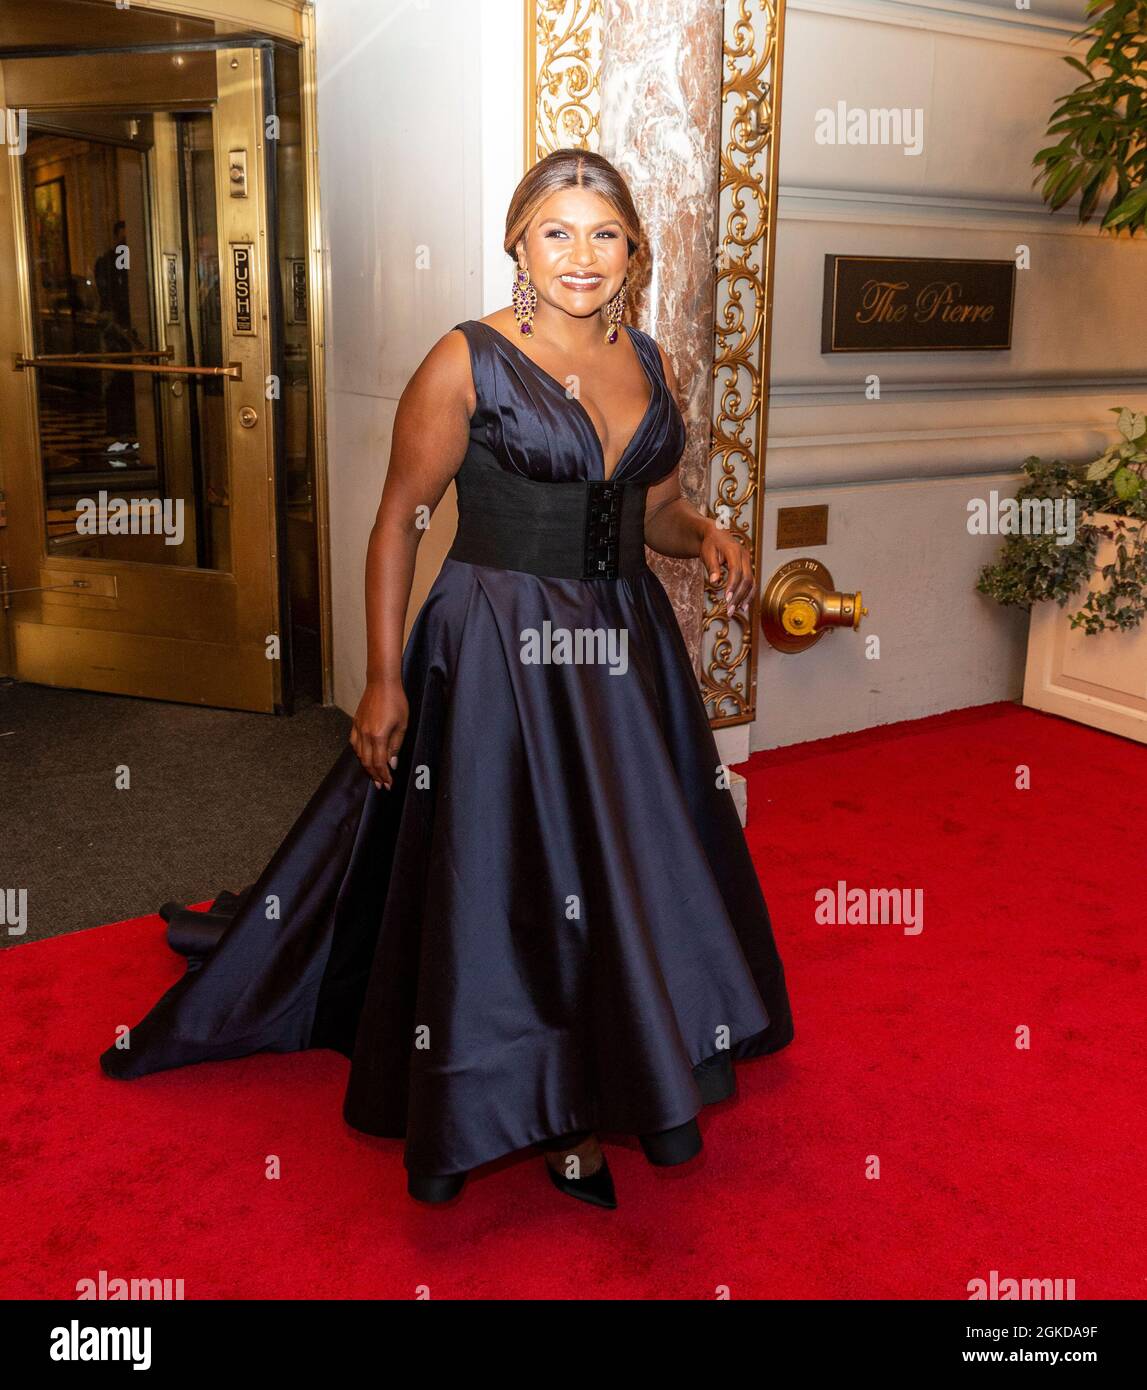 New York, NY - September 13, 2021:MindyKaling departs The Pierre Hotel for the 2021 Met Gala Celebrating In America: A Lexicon Of Fashion Stock Photo